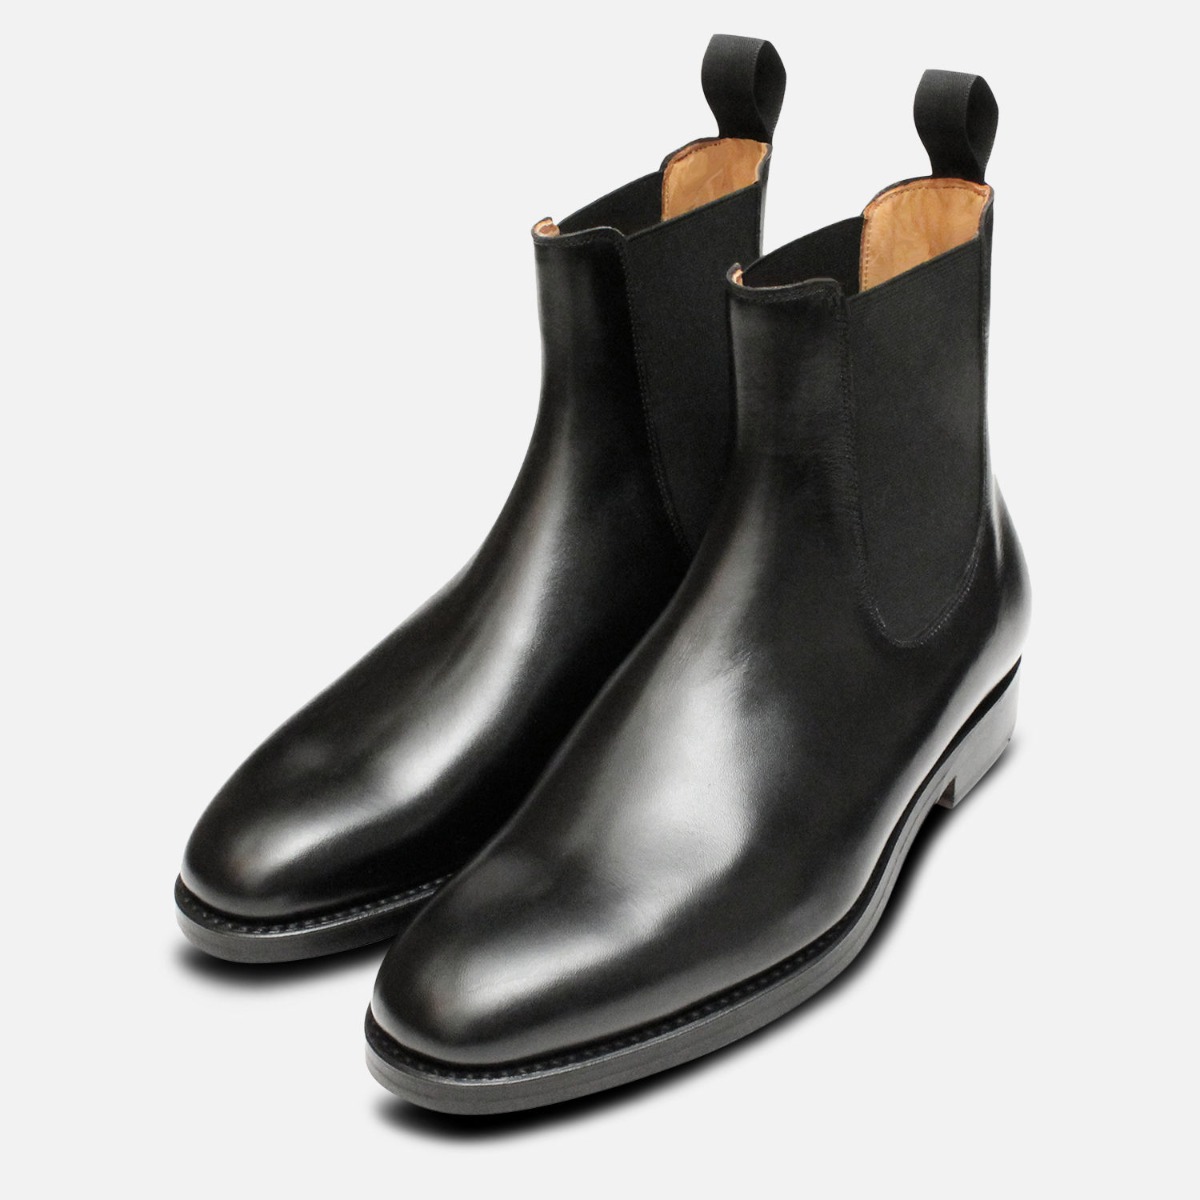 Black Wholecut Goodyear Welted Chelsea Boots | eBay